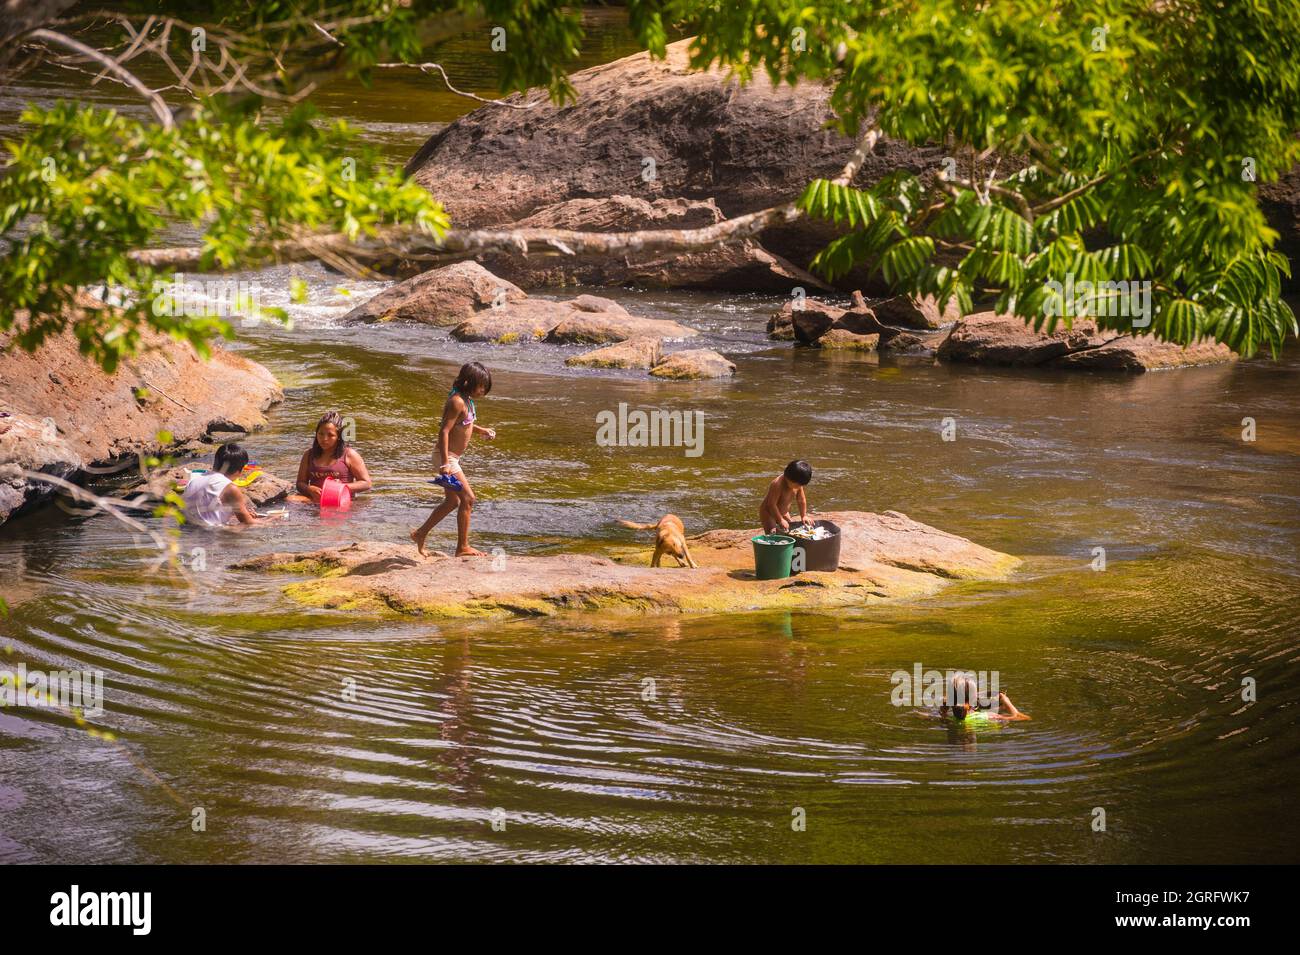 France, French Guiana, Camopi, Parc Amazonien de Guyane, heart zone, scene of life and laundry for an Amerindian family, in the Oyapock river (natural border with Brazil) Stock Photo